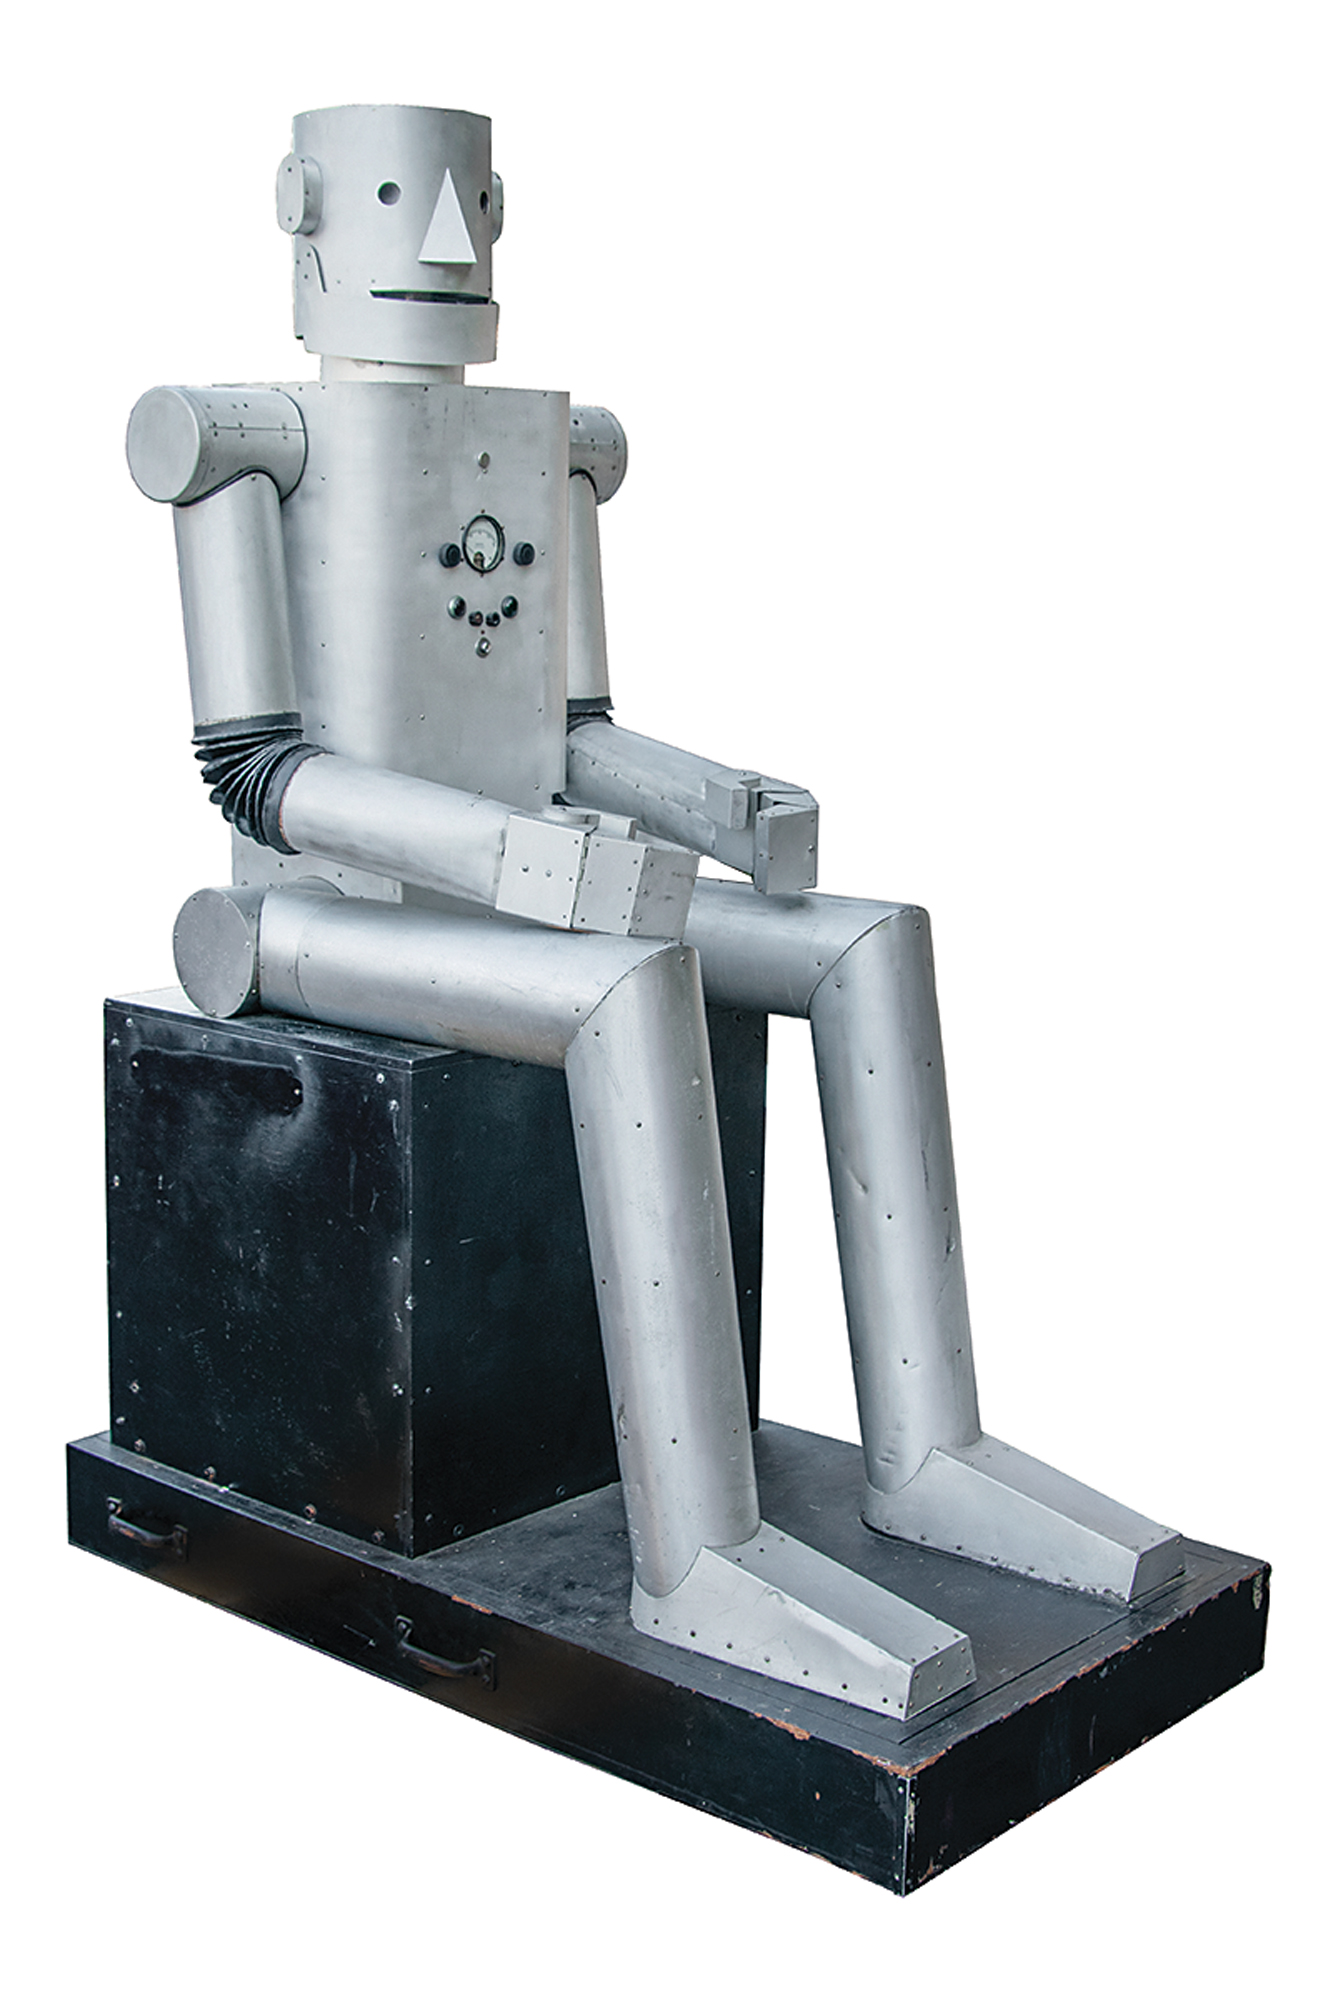 first robot ever invented